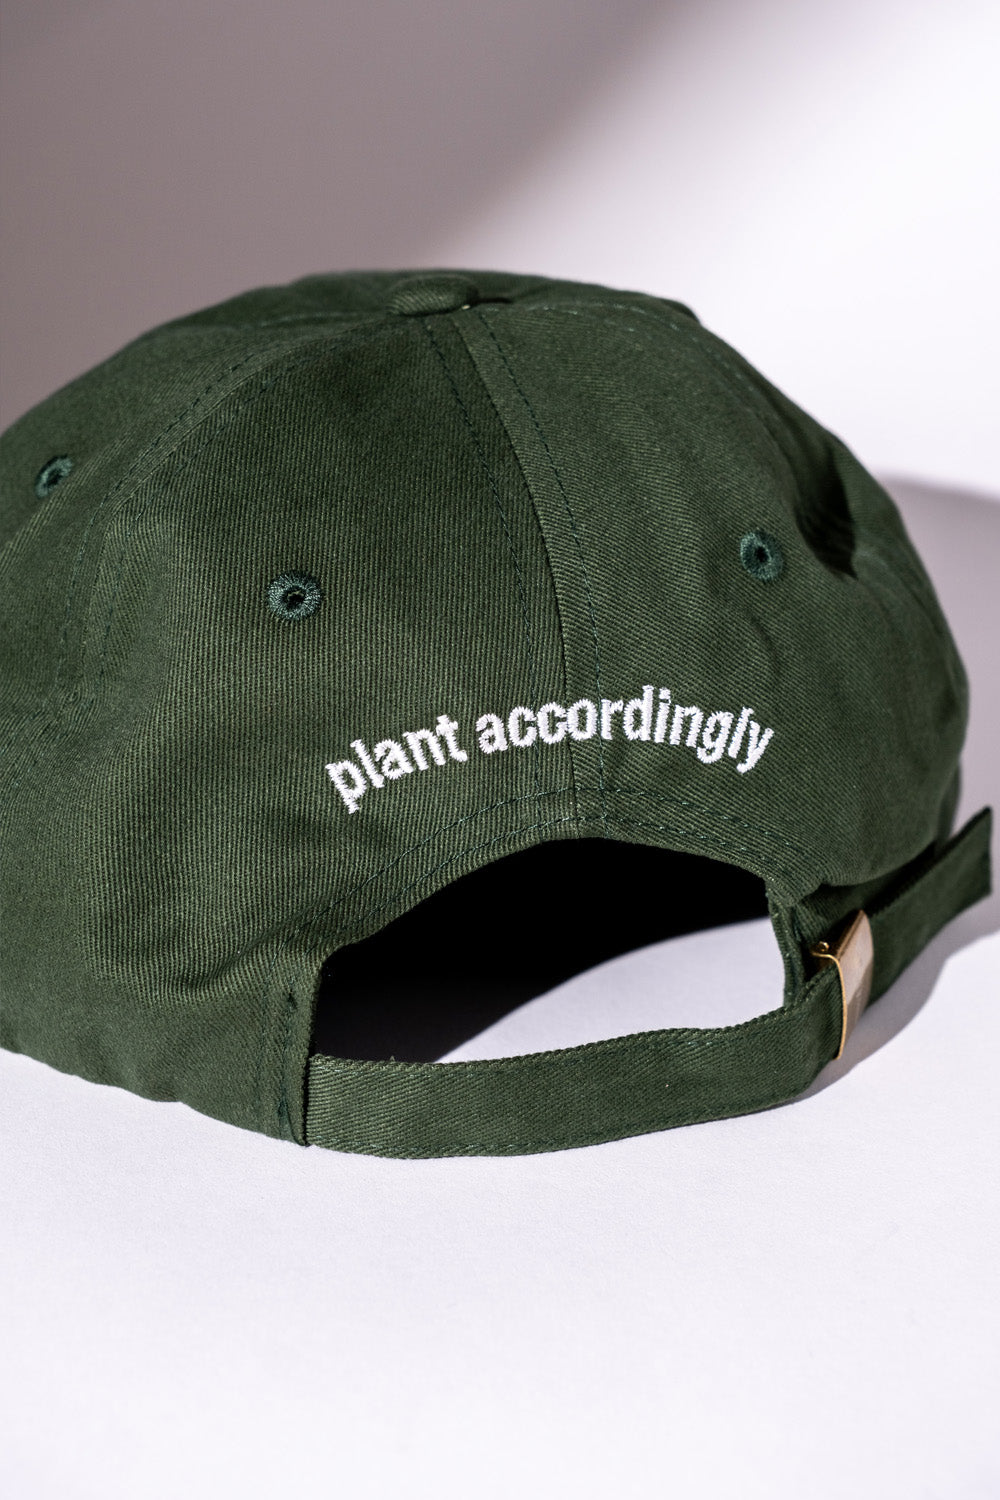 Plant Accordingly Brushed Cotton Hat